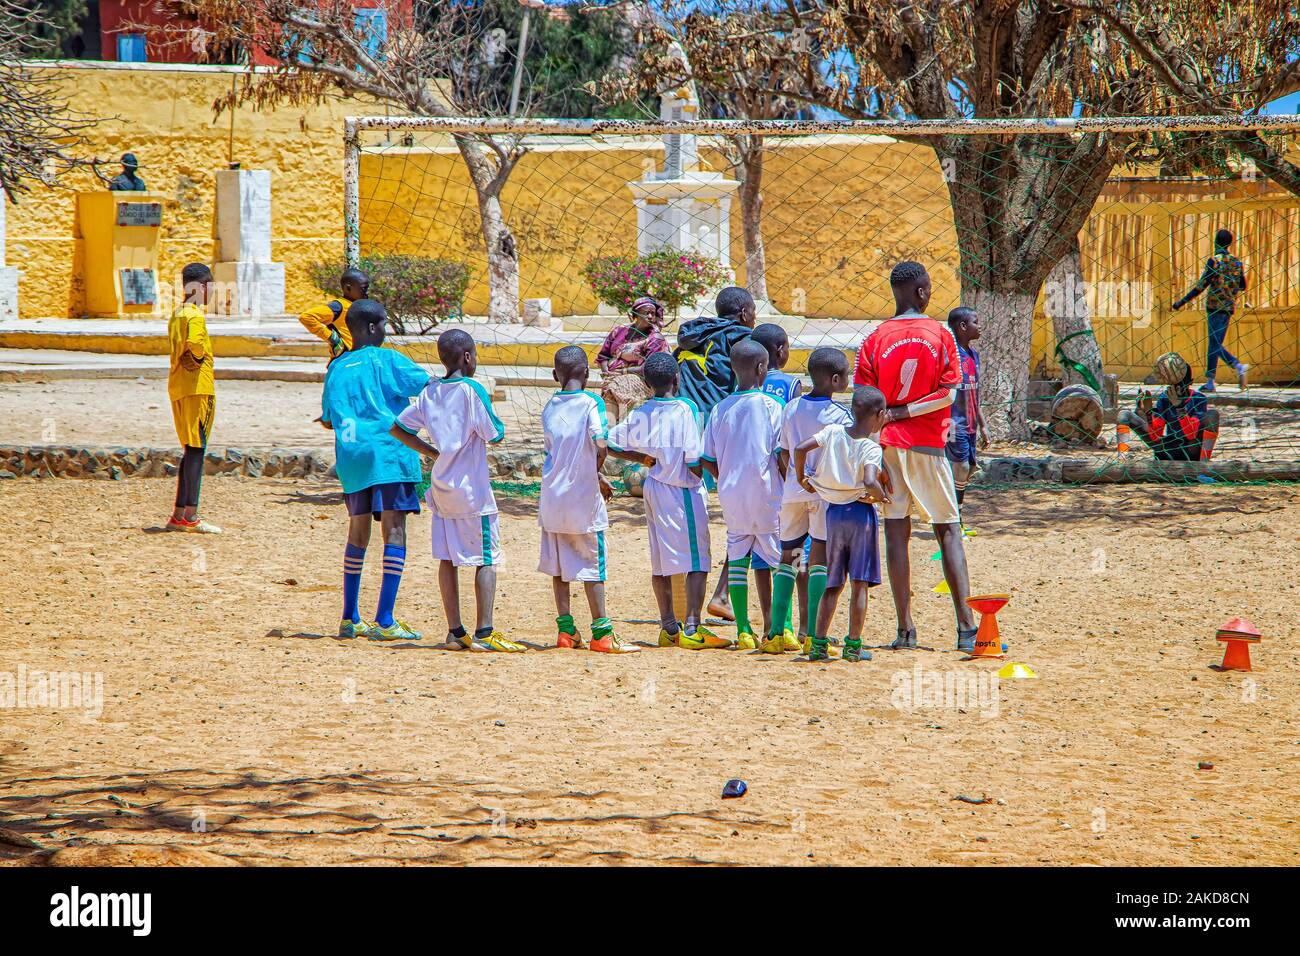 Goree island, Senegal- April 22 2019: Unidentified boys play soccer on the sand in the town in Africa. The boys are wearing a white football jersey. Stock Photo